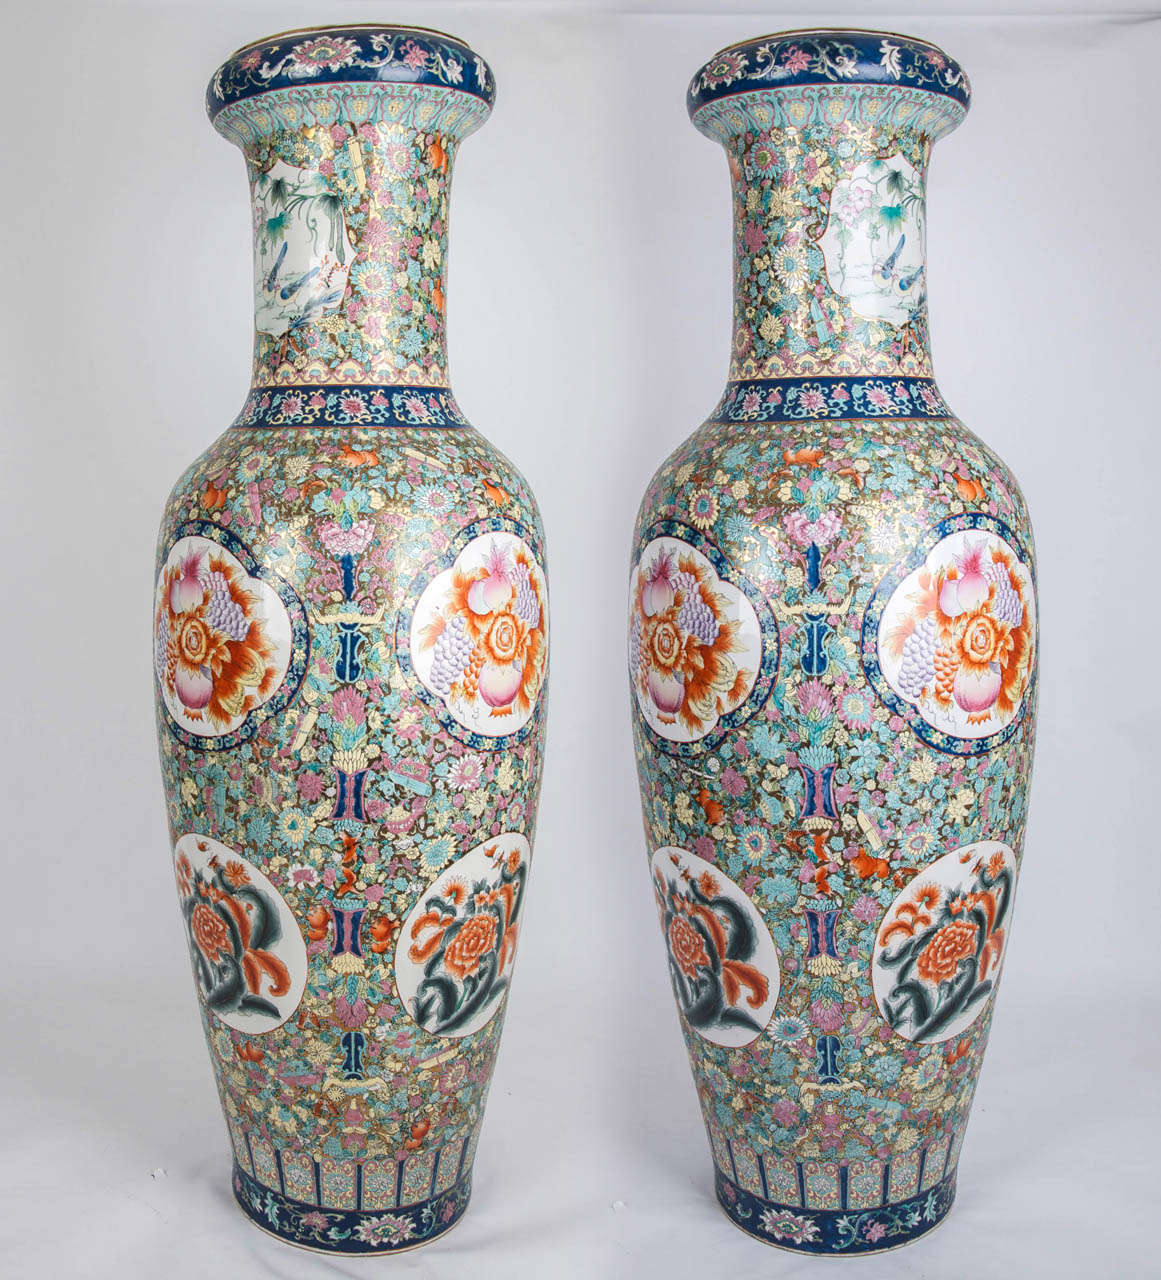 These are a VERY TALL and impressive PAIR of CHINESE Porcelain Palace or Floor Vases.

The vases have a baluster form with tall necks.

Each vase is similar but different in detail as they are hand enamelled. The  decoration is stunning with